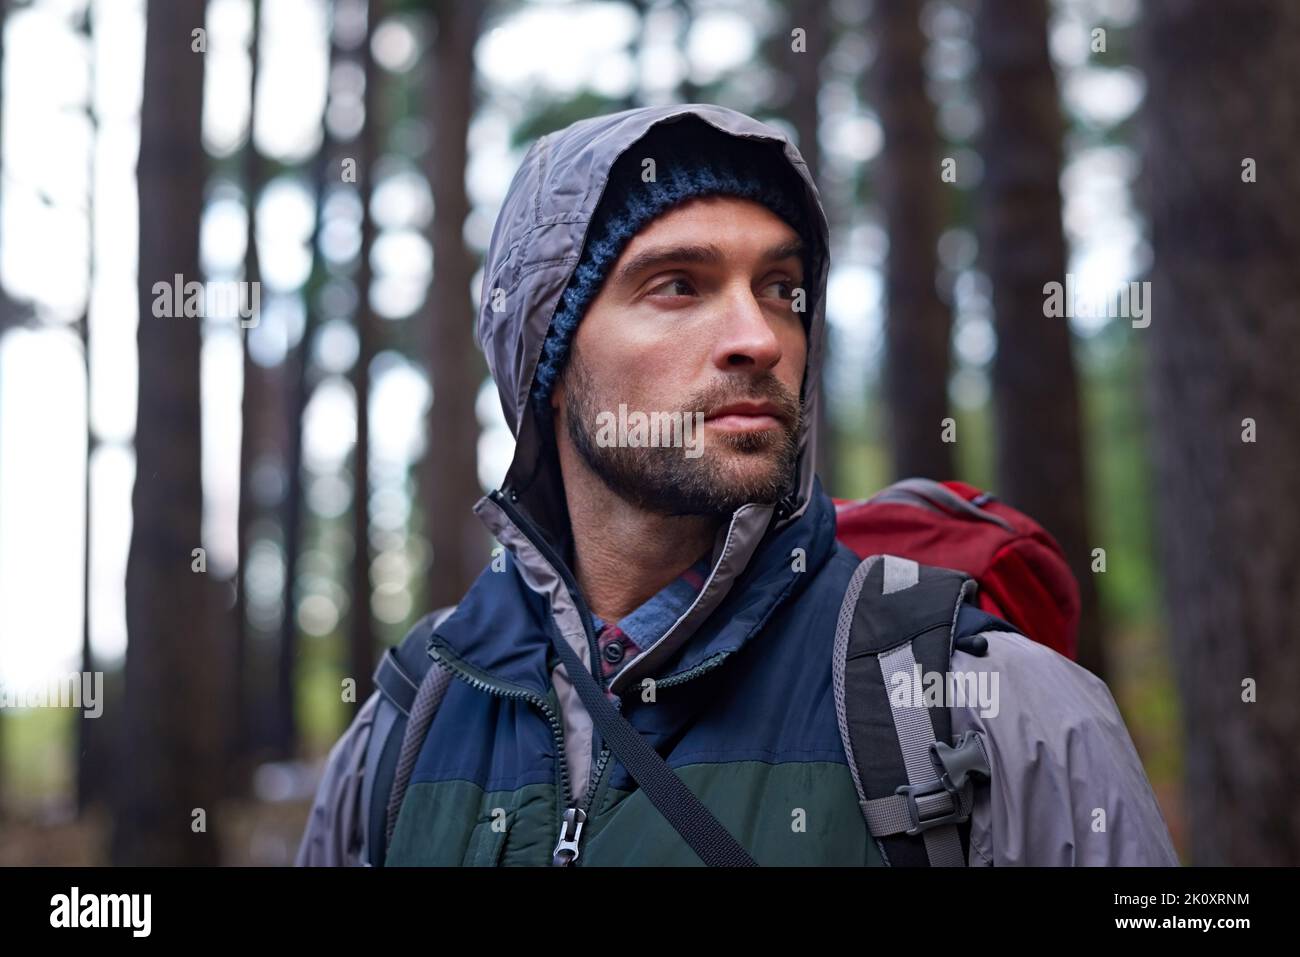 Man on a mission. Portrait of a young man wearing a backpack while hiking in the forest. Stock Photo